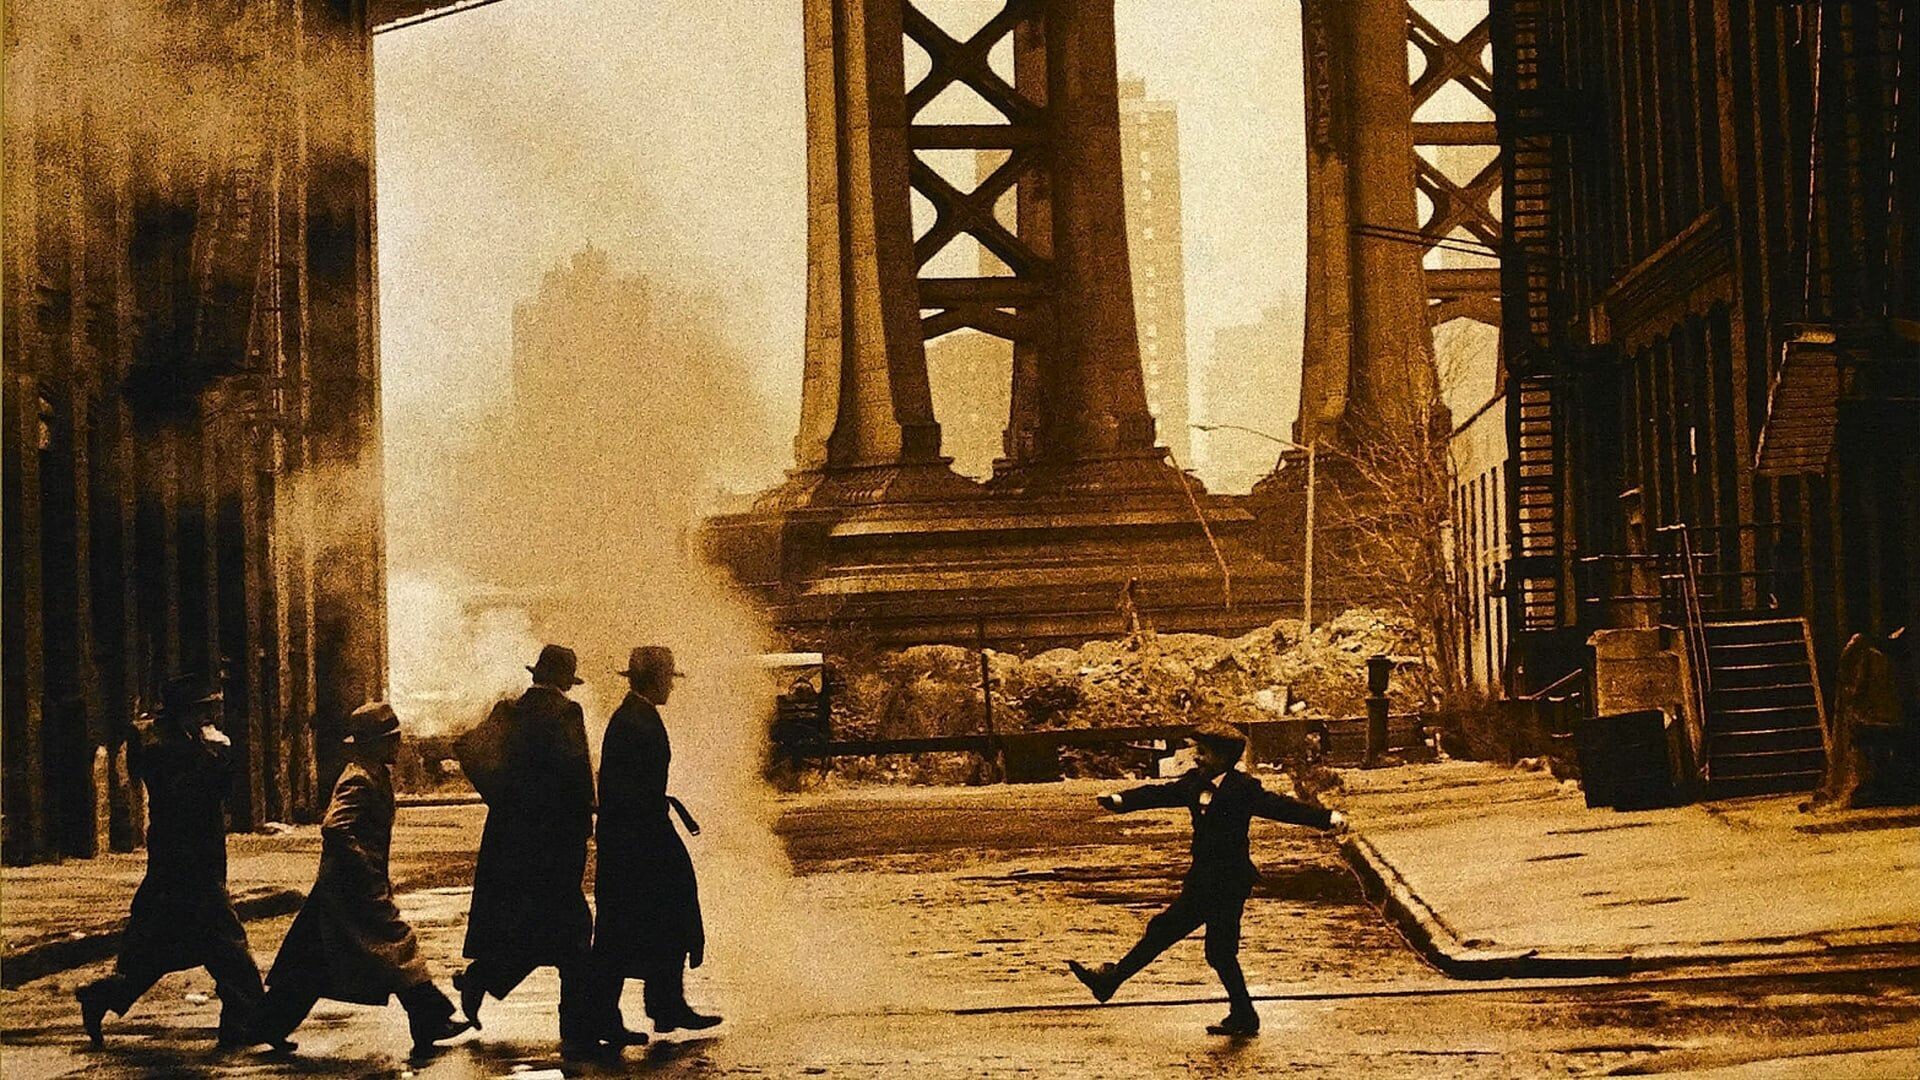 Once Upon a Time in America: The film explores themes of childhood friendships, love, lust, greed, with the rise of mobsters in American society. 1920x1080 Full HD Background.